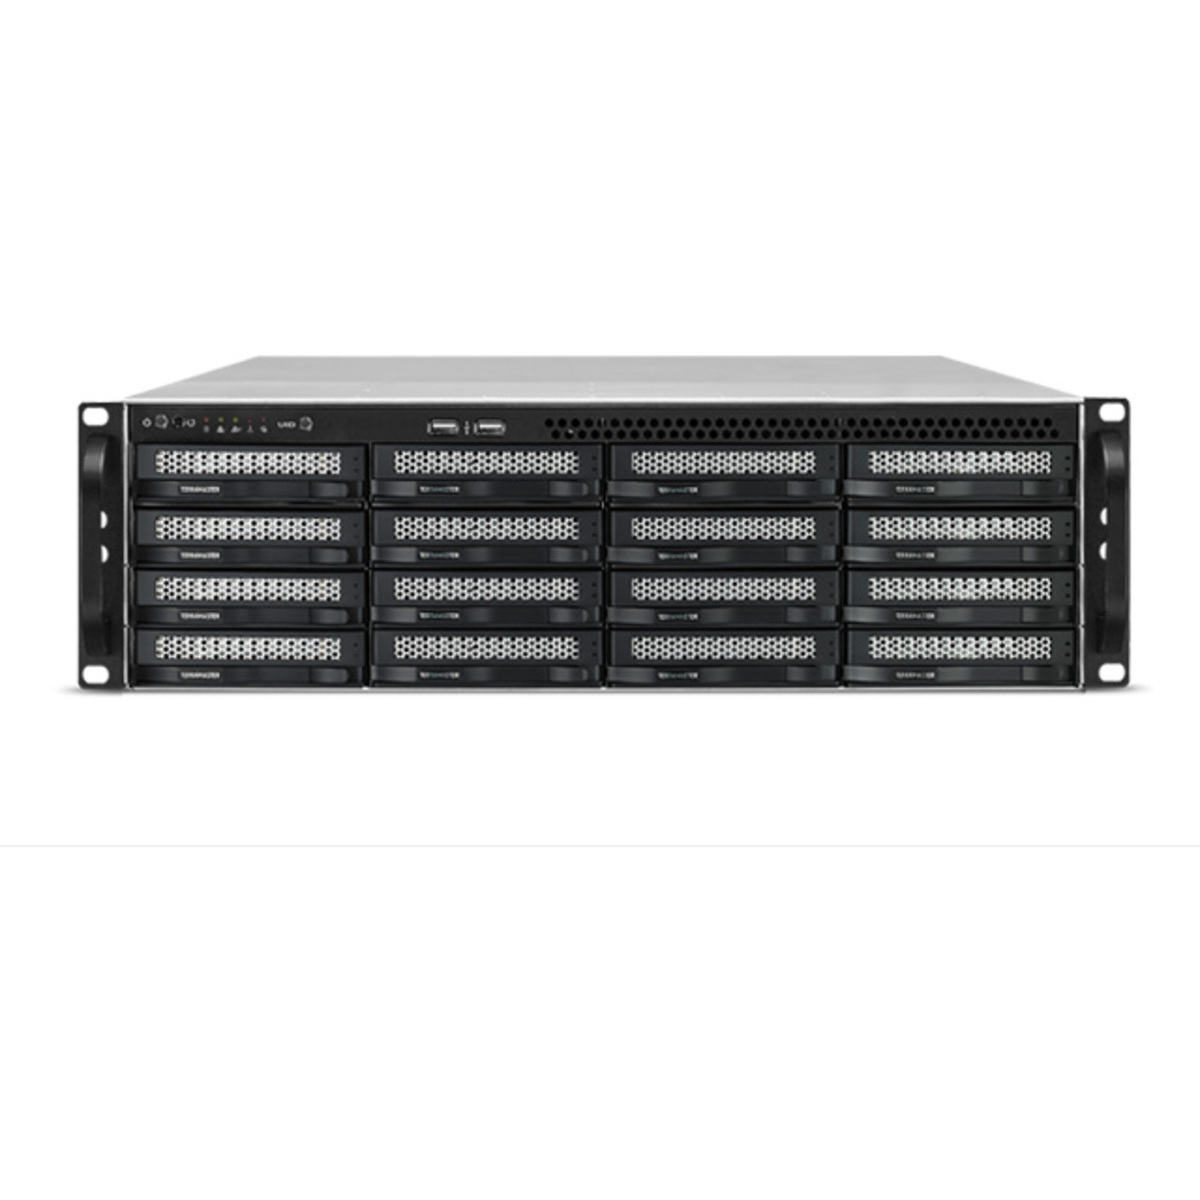 TerraMaster U16-722-2224 112tb 16-Bay RackMount Large Business / Enterprise NAS - Network Attached Storage Device 14x8tb Seagate IronWolf Pro ST8000NT001 3.5 7200rpm SATA 6Gb/s HDD NAS Class Drives Installed - Burn-In Tested - ON SALE U16-722-2224